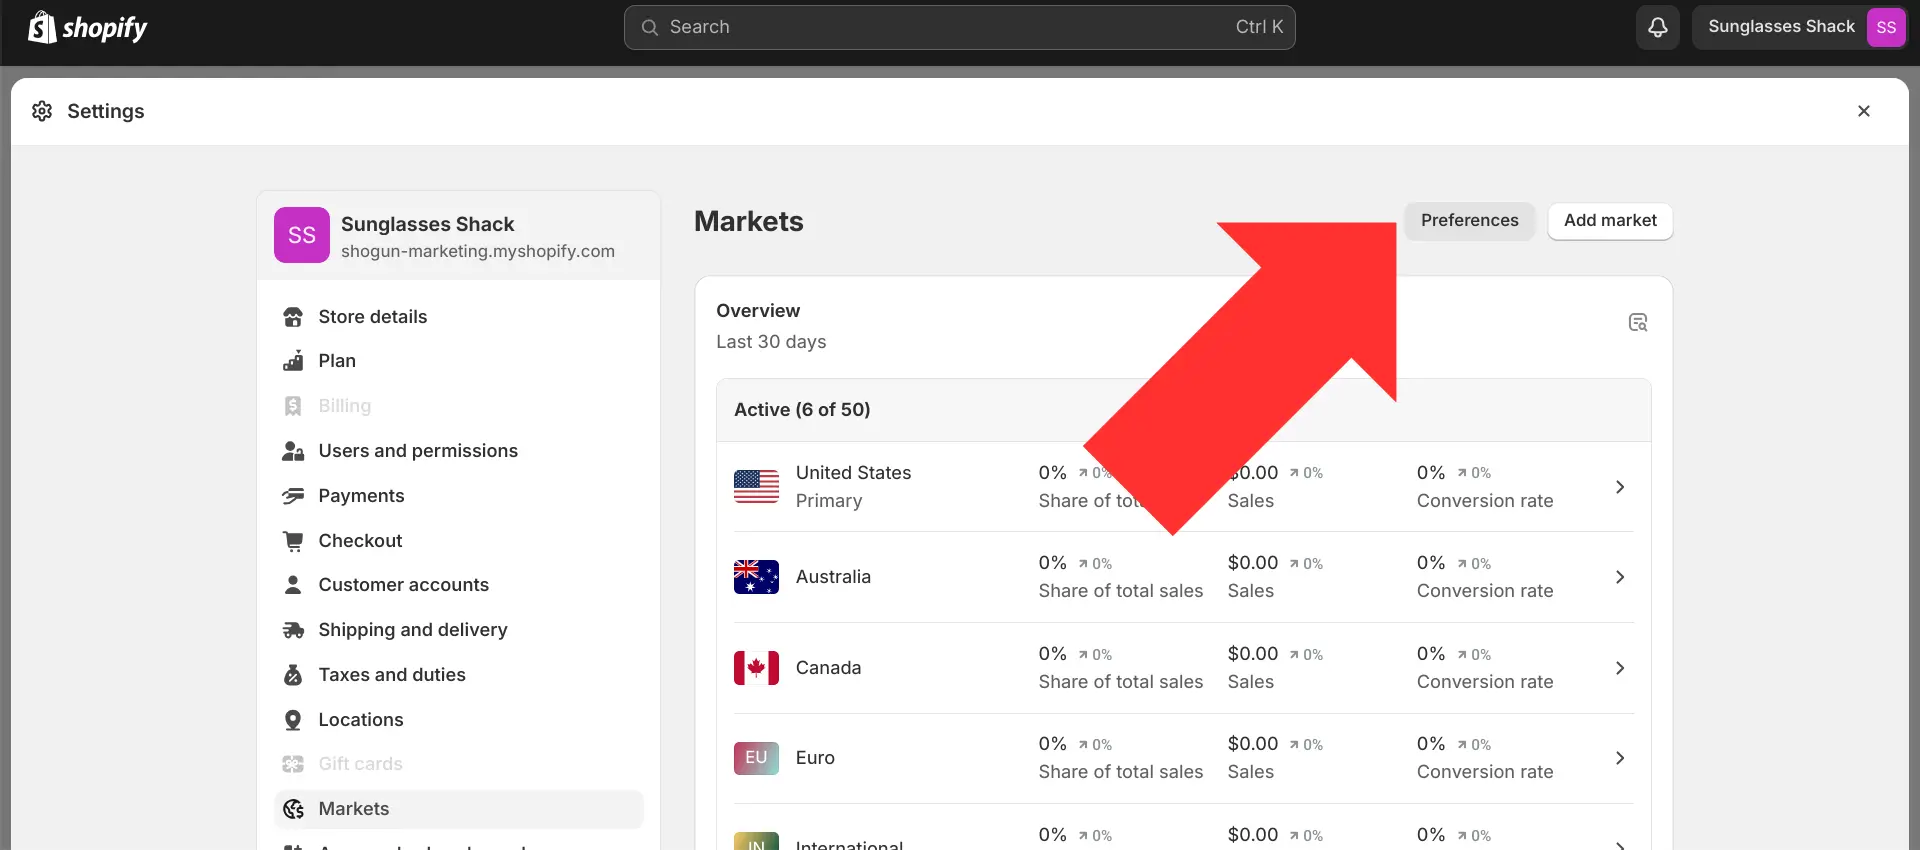 Go back to the “Markets” page and select “Preferences”.